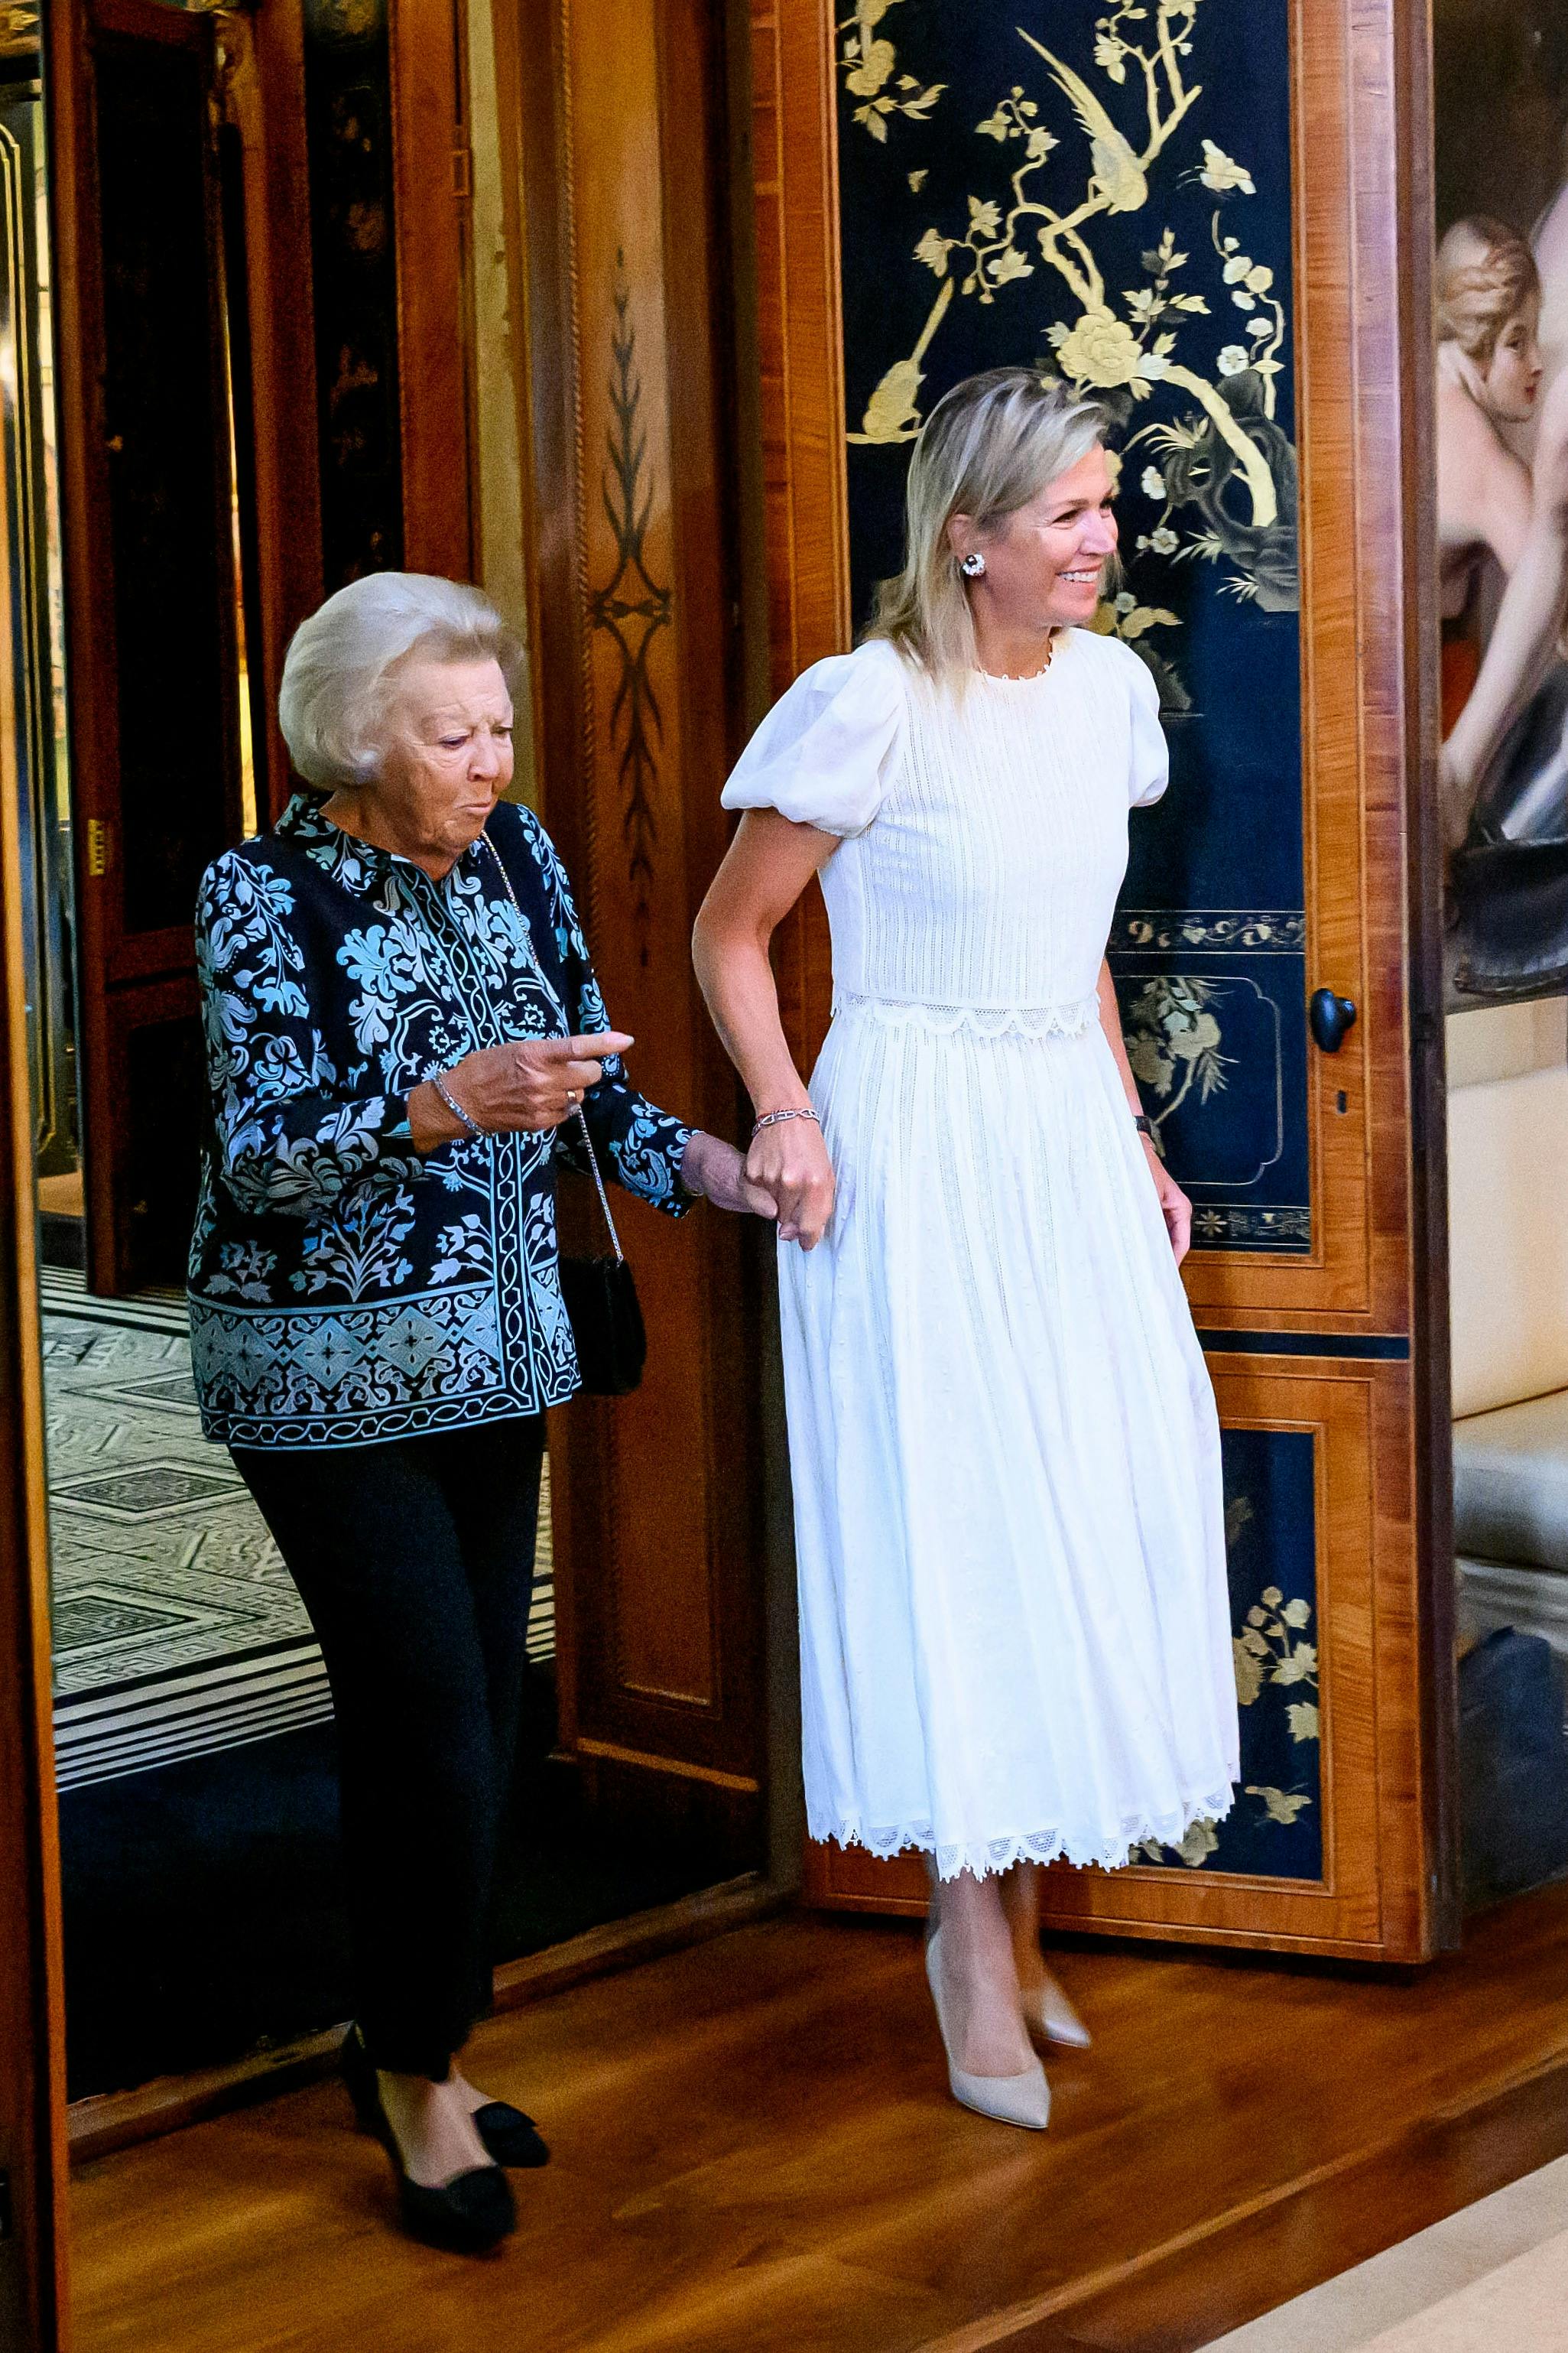 Queen Maxima and Princess Beatrix at the reception for the craftsmen who helped embroider the new curtains for the Chinese Hall in Huis ten Bosch Palace in The Hague. 20 Sep 2023 Pictured: Queen Maxima and Princess Beatrix at the reception for the craftsmen who helped embroider the new curtains for the Chinese Hall in Huis ten Bosch Palace in The Hague. Photo credit: MEGA TheMegaAgency.com +1 888 505 6342 (Mega Agency TagID: MEGA1034419_036.jpg) [Photo via Mega Agency]